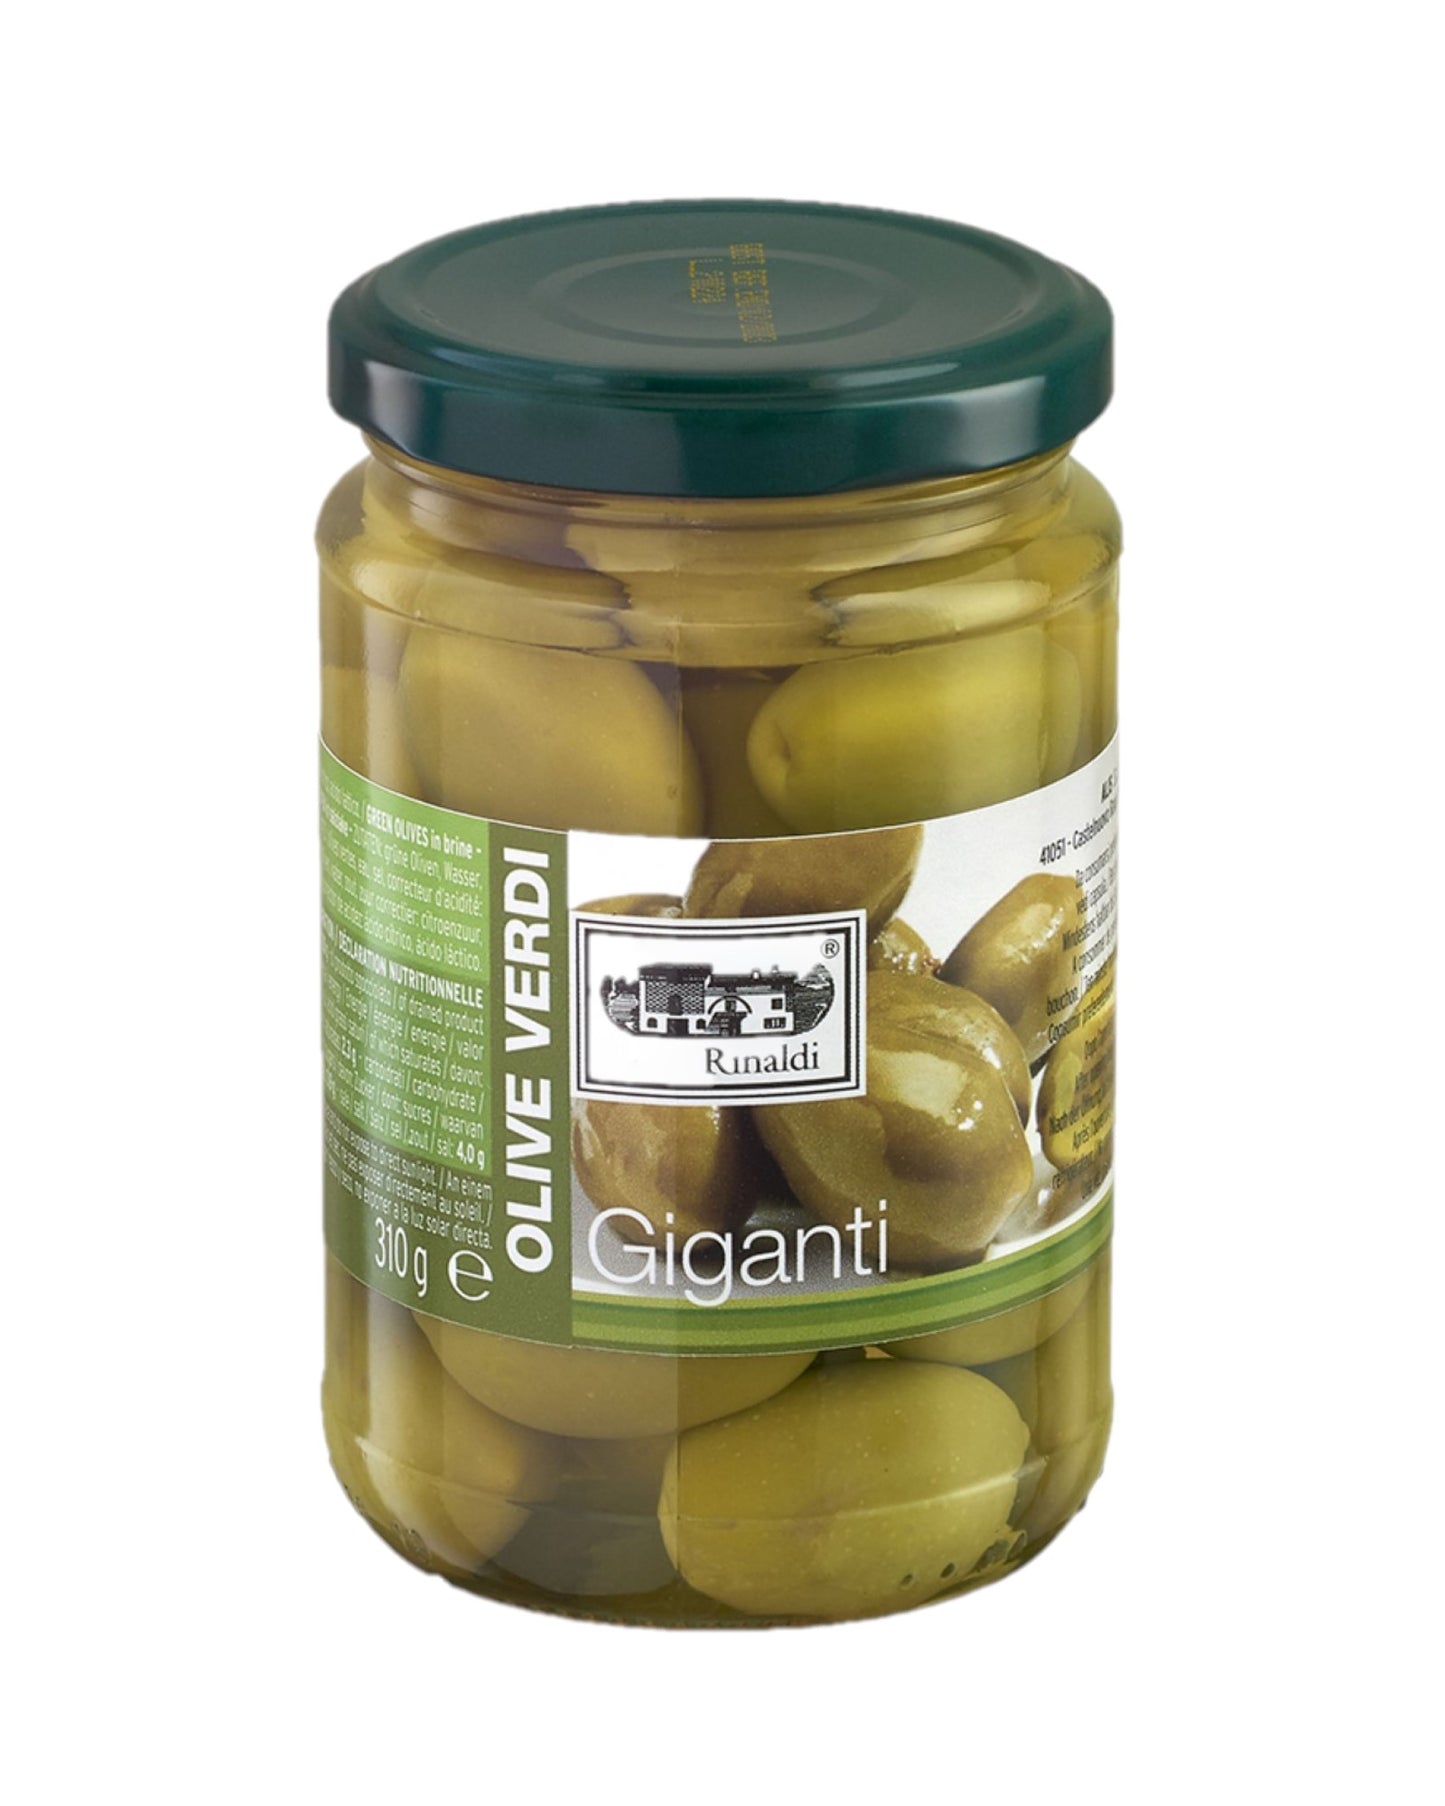 Giant green olives in brine